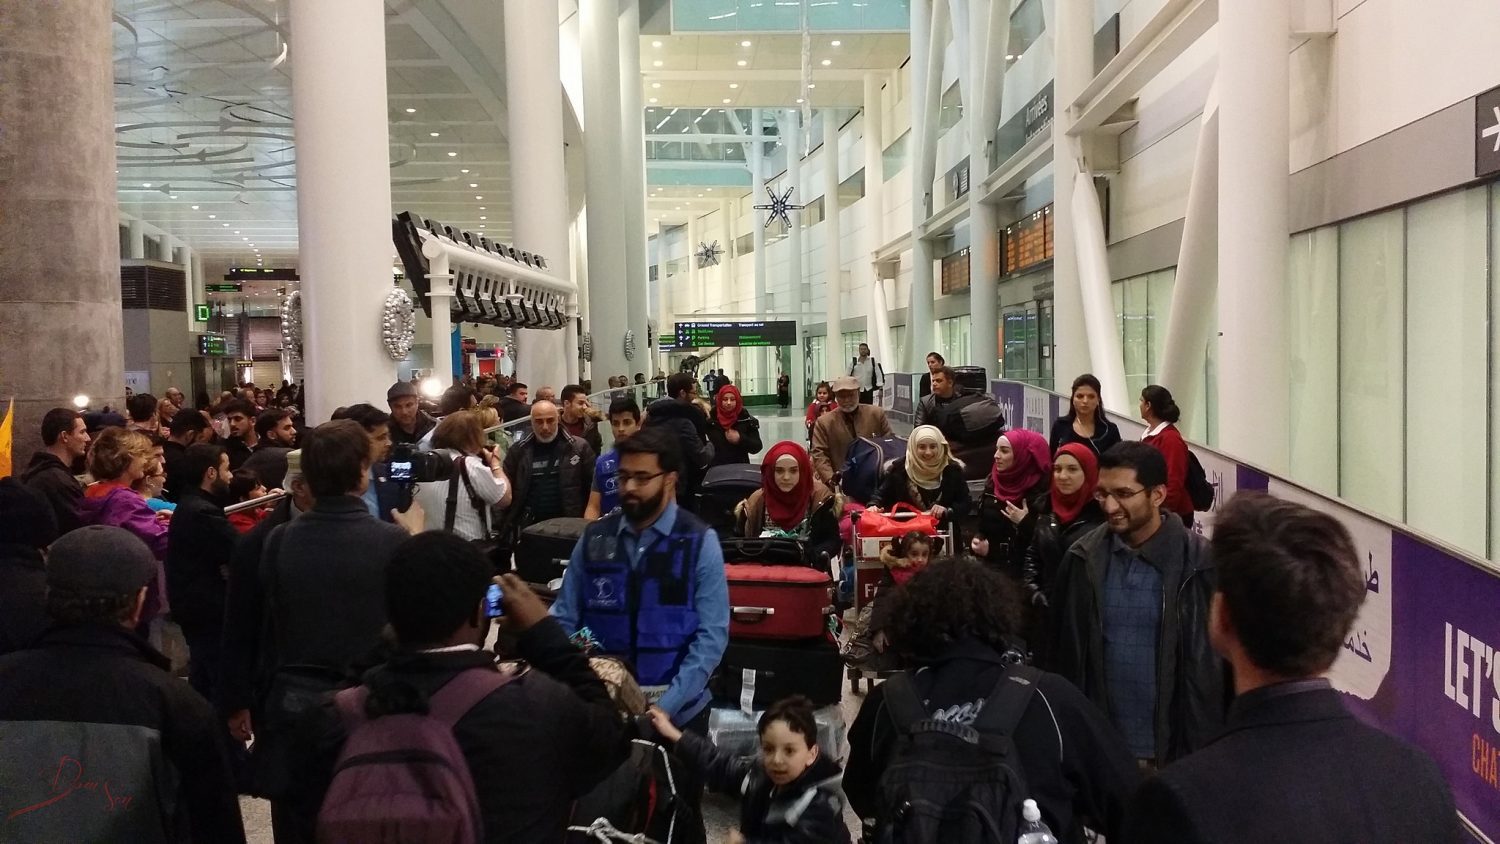 A family from Syria arrives in Toronto. Image courtesy of Domnic Santiago/CC BY 2.0.